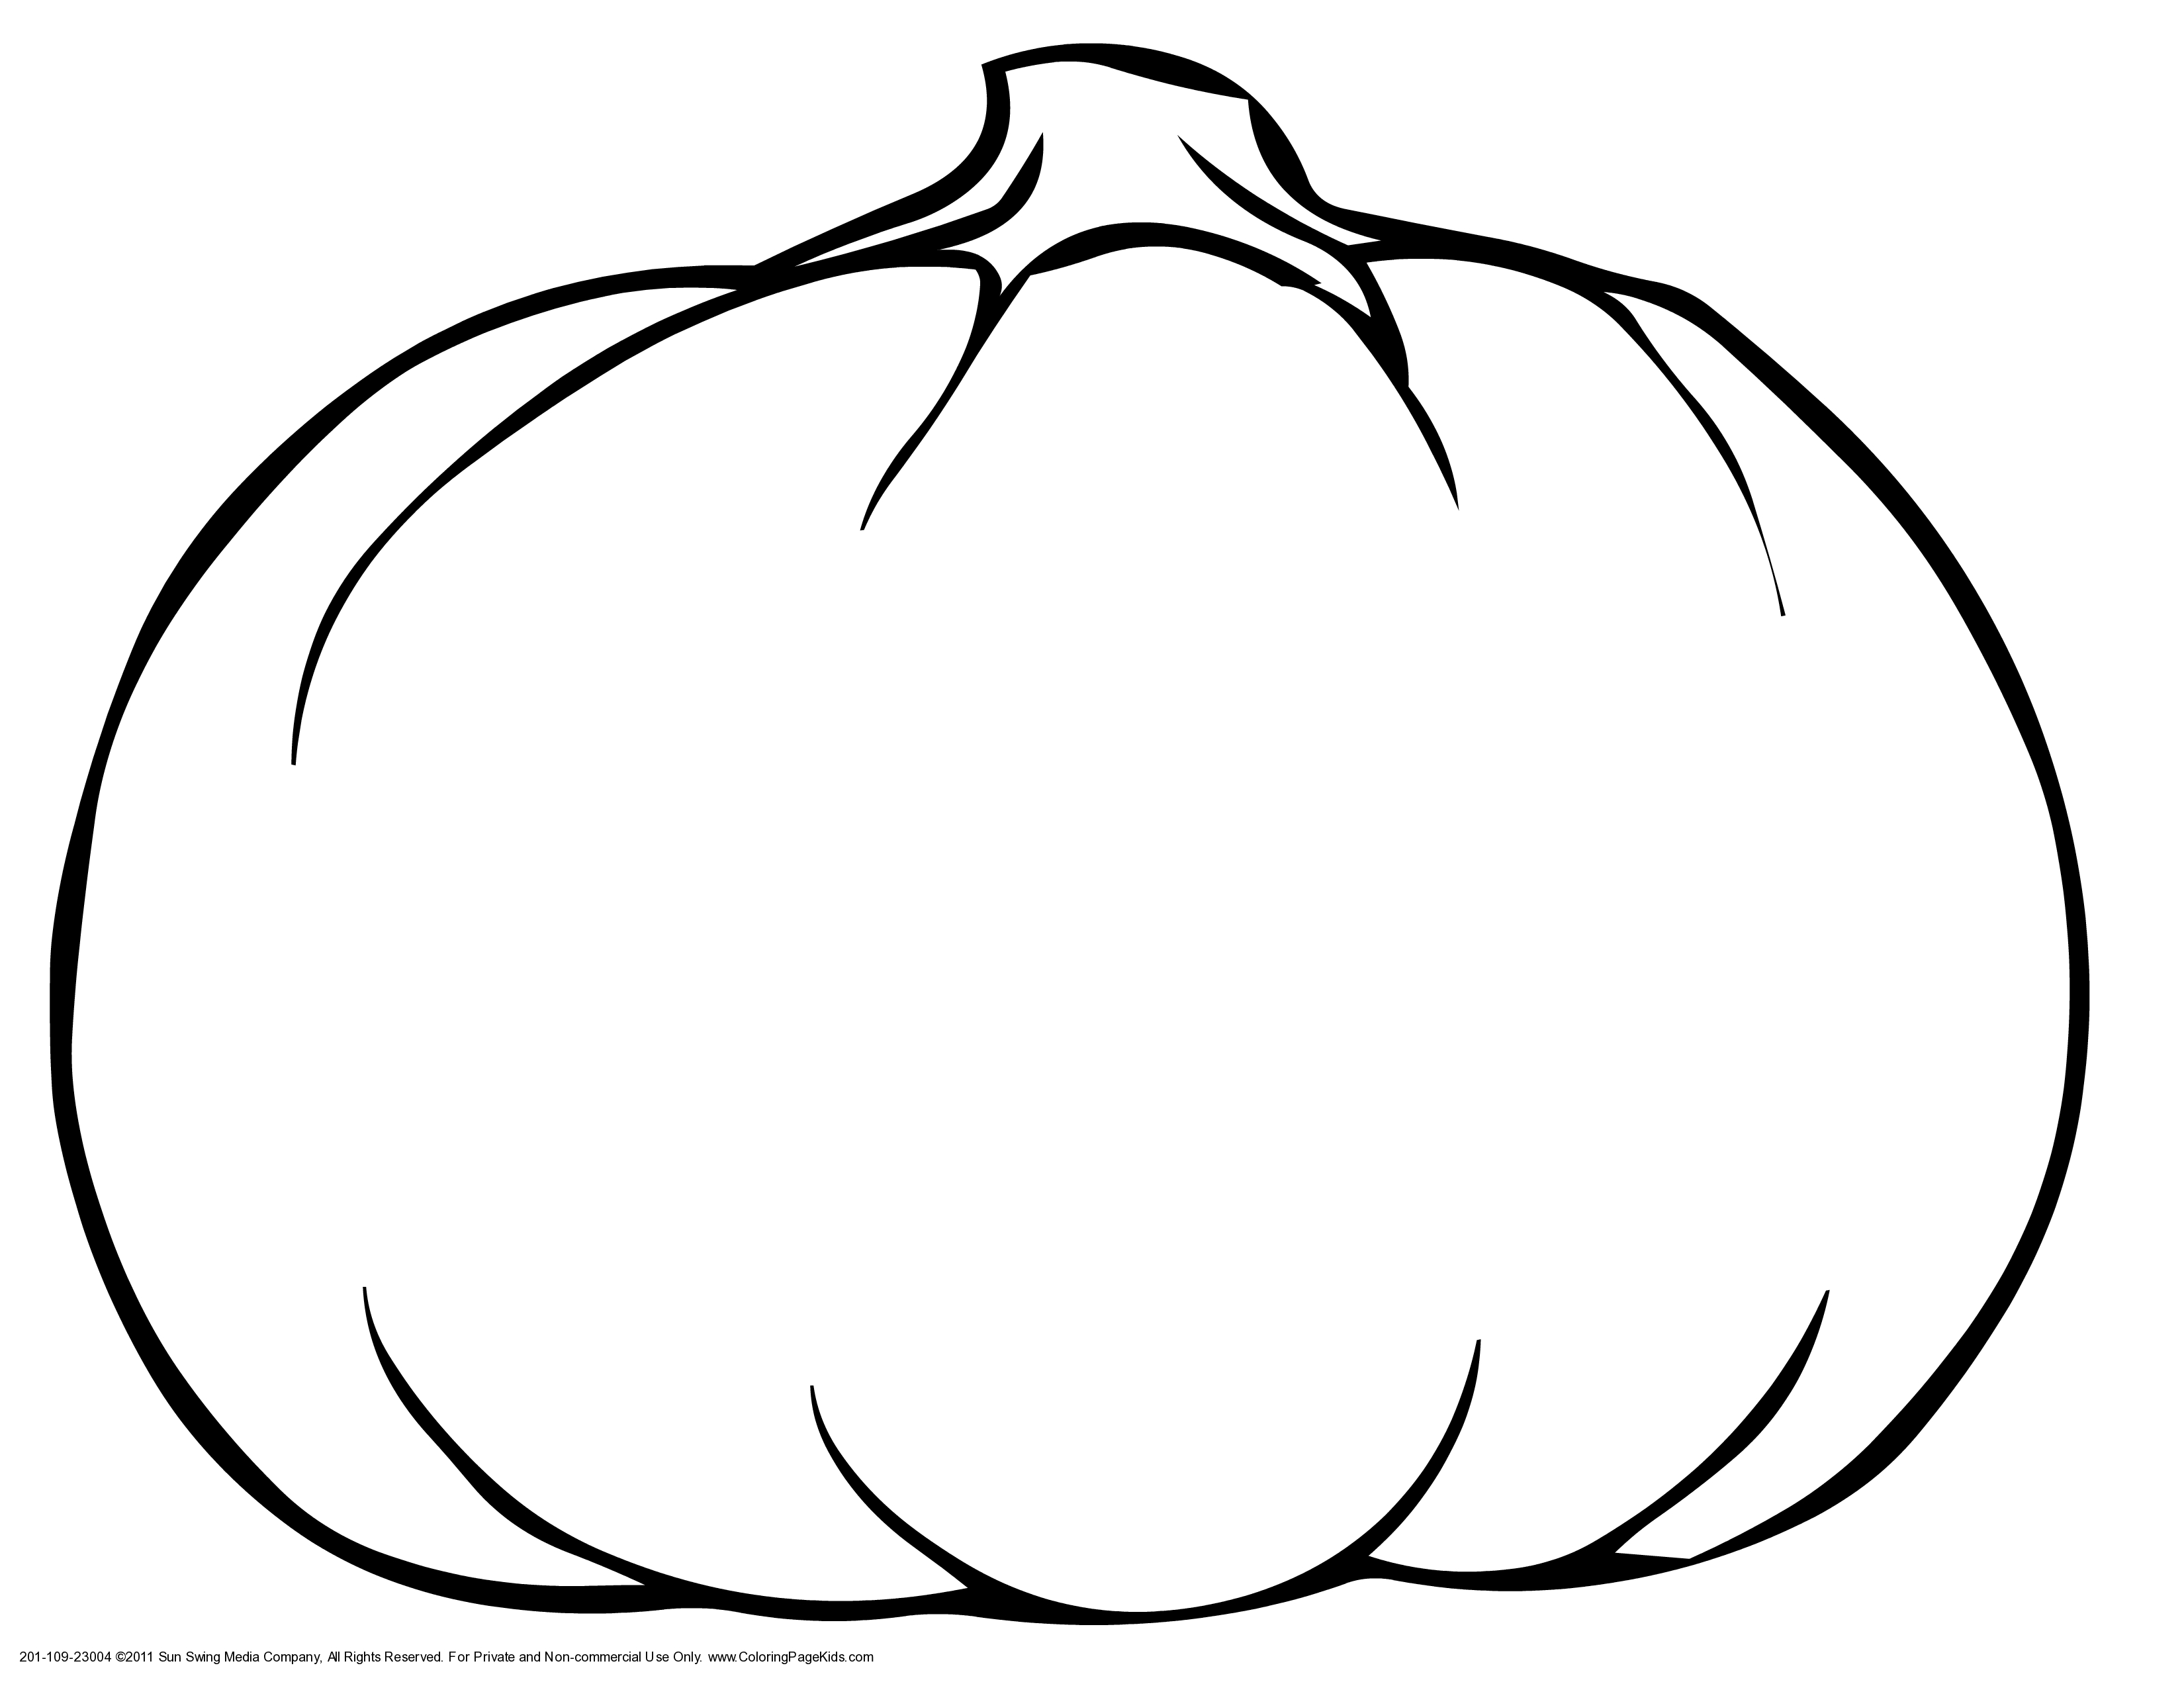 Coloring Pages Online To Print Free Pumpkin Art Coloring Page Pages Online Printable Sheets For